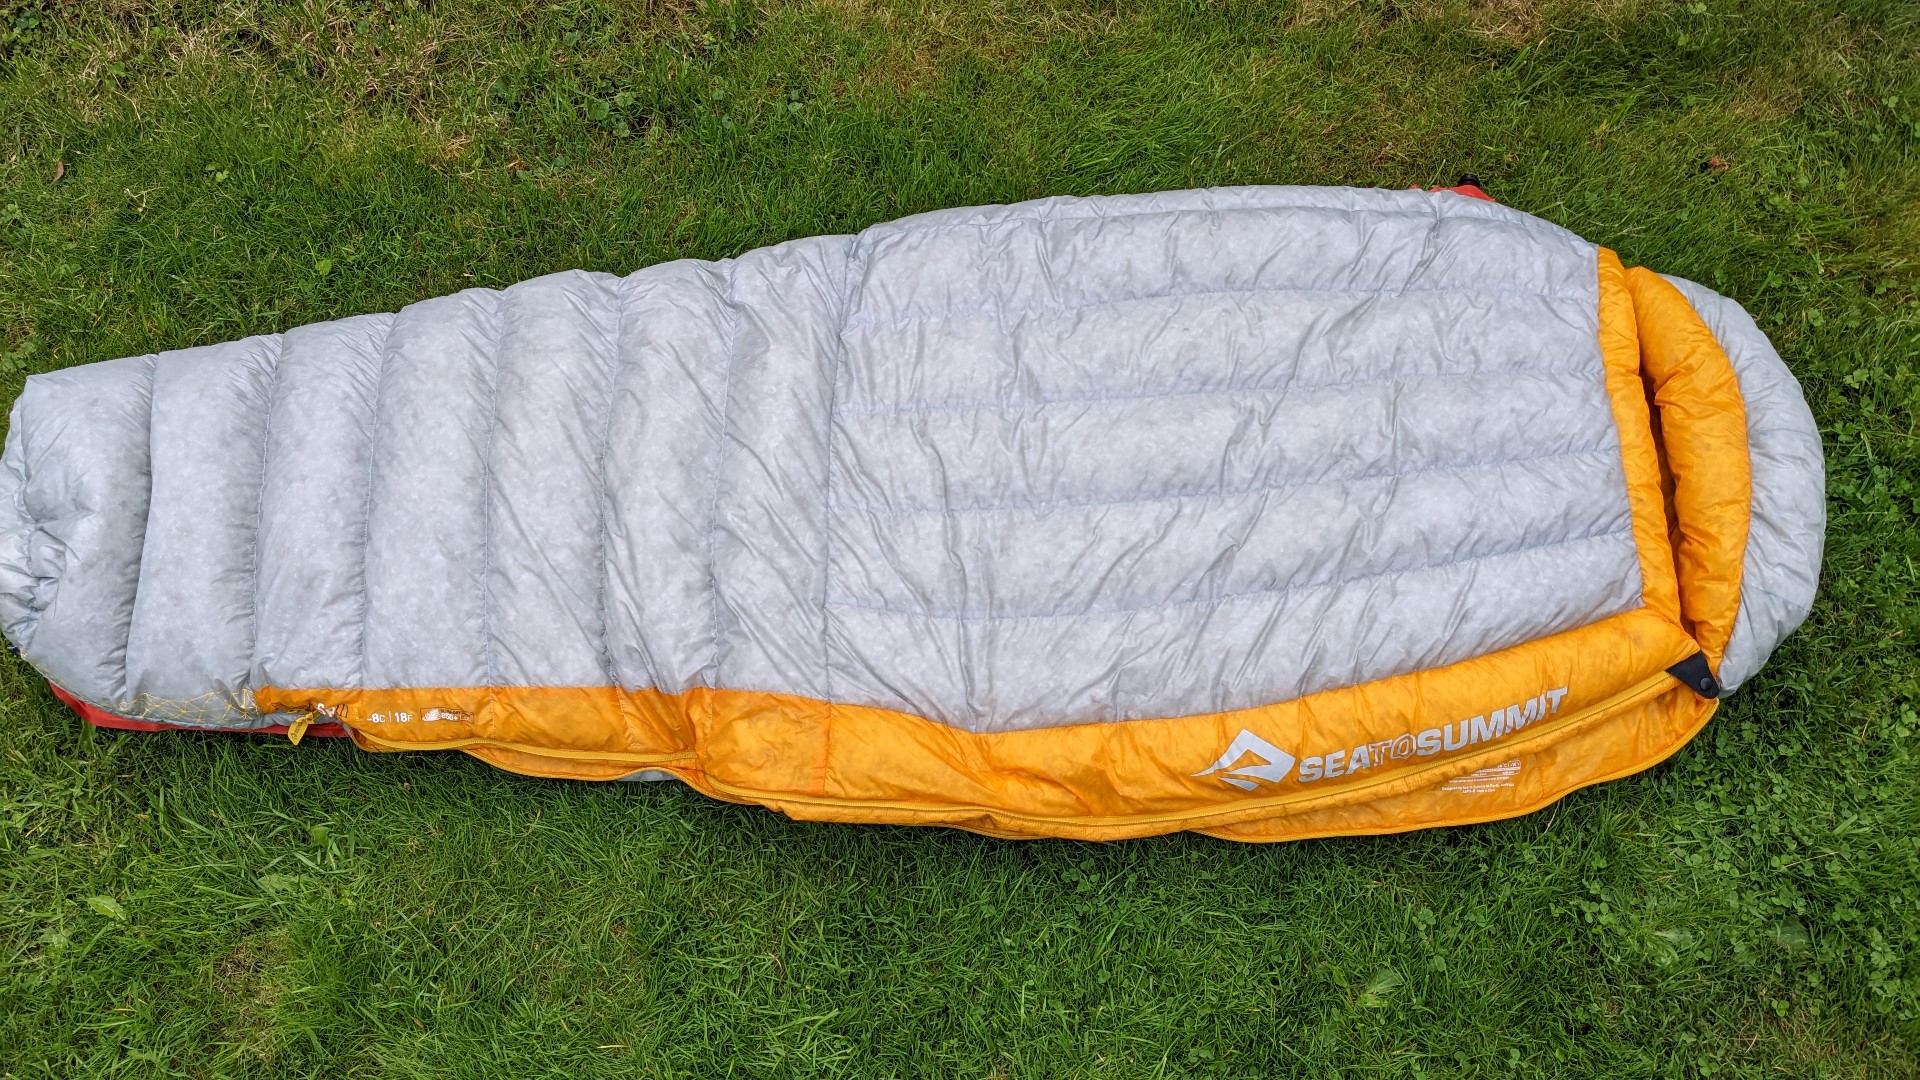 Sea to Summit Spark SP III Sleeping Bag Review: light and warm and